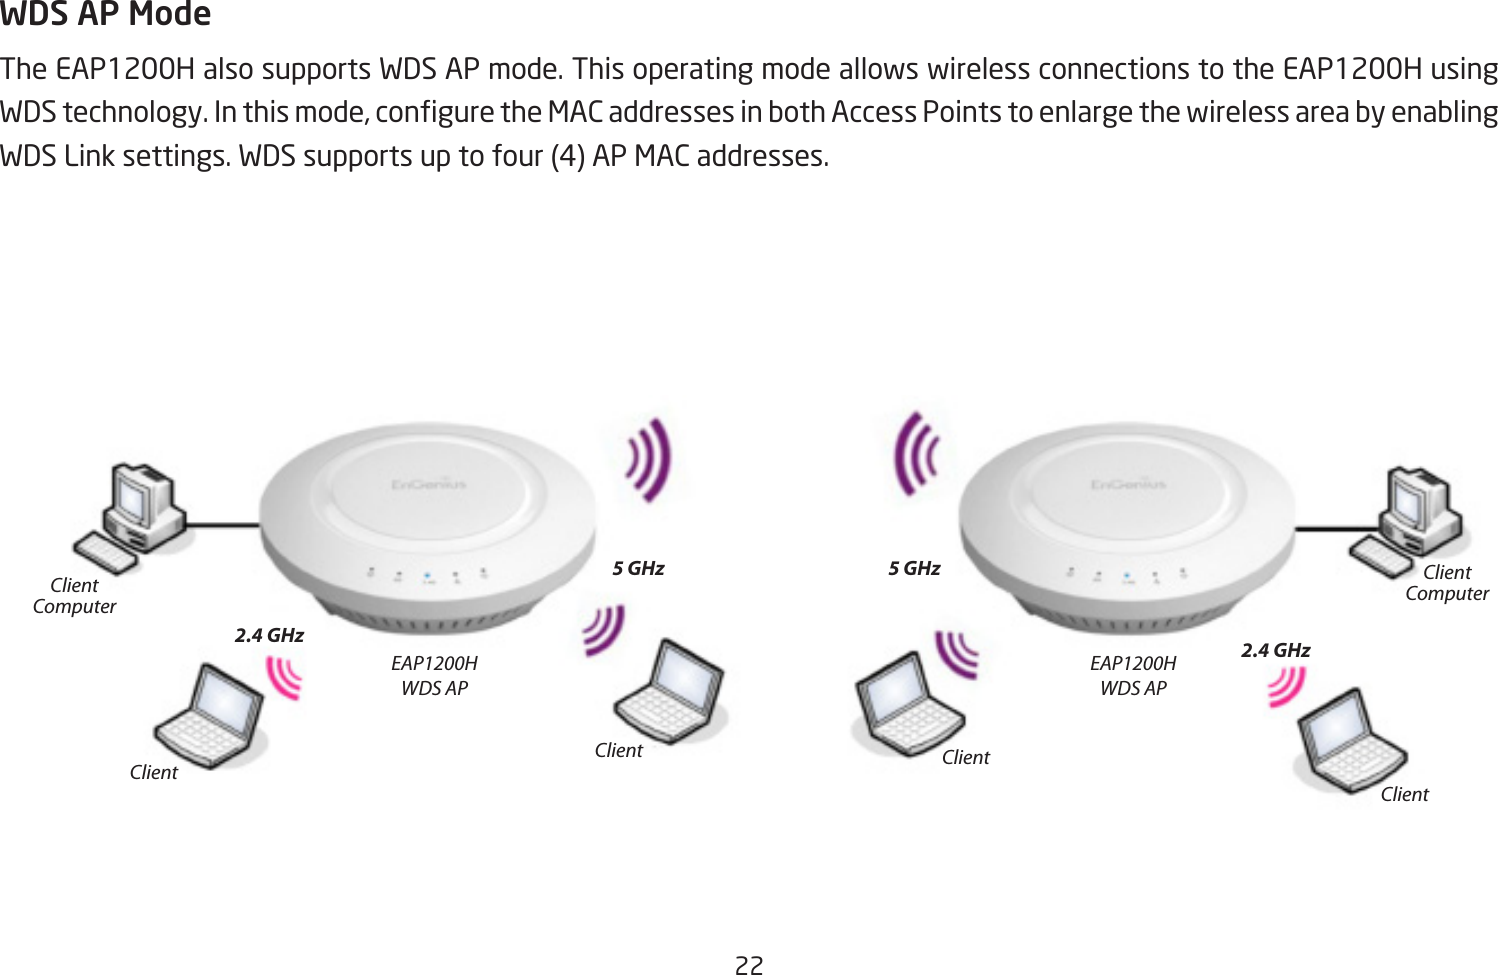 22 WDS AP ModeThe EAP1200H also supports WDS AP mode. This operating mode allows wireless connections to the EAP1200H using WDStechnology.Inthismode,conguretheMACaddressesinbothAccessPointstoenlargethewirelessareabyenablingWDS Link settings. WDS supports up to four (4) AP MAC addresses.EAP1200HWDS APEAP1200HWDS AP2.4 GHz 2.4 GHz5 GHz 5 GHzClientClient ClientClientClientComputerClientComputer